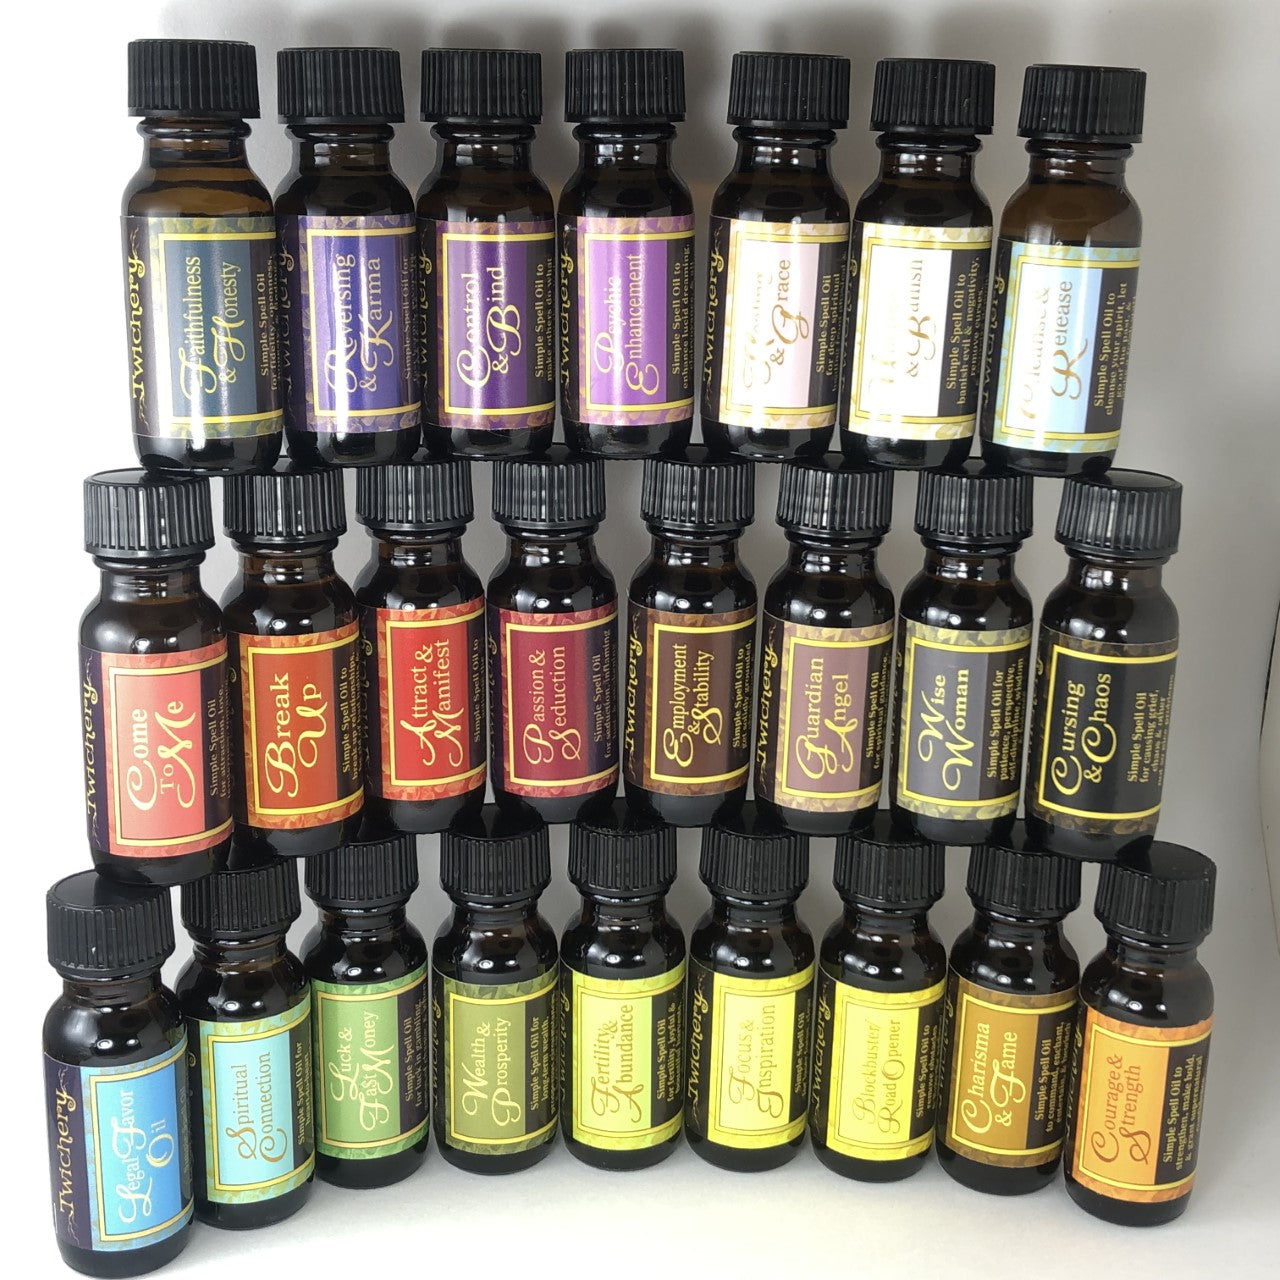 Twichery Quikspell Oils for getting people to do what you say. Beautifully collectible. Control & Bind Quikspell Oil pictured with all other Twichery Quikspell Oils! Hoodoo, Voodoo, Wicca, Pagan